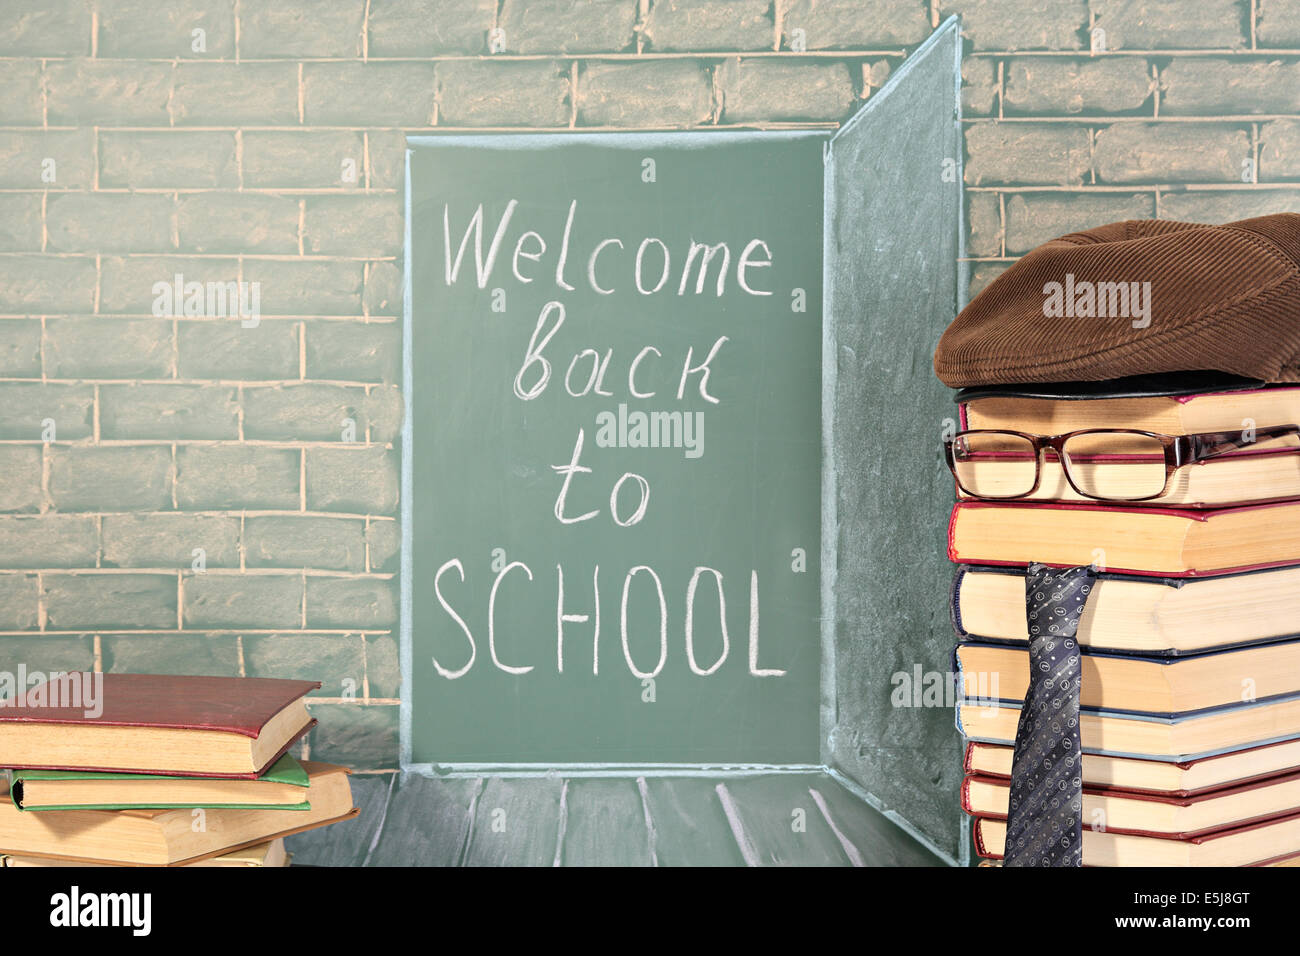 Back to school idea with text on chalkboard and teacher from books Stock Photo